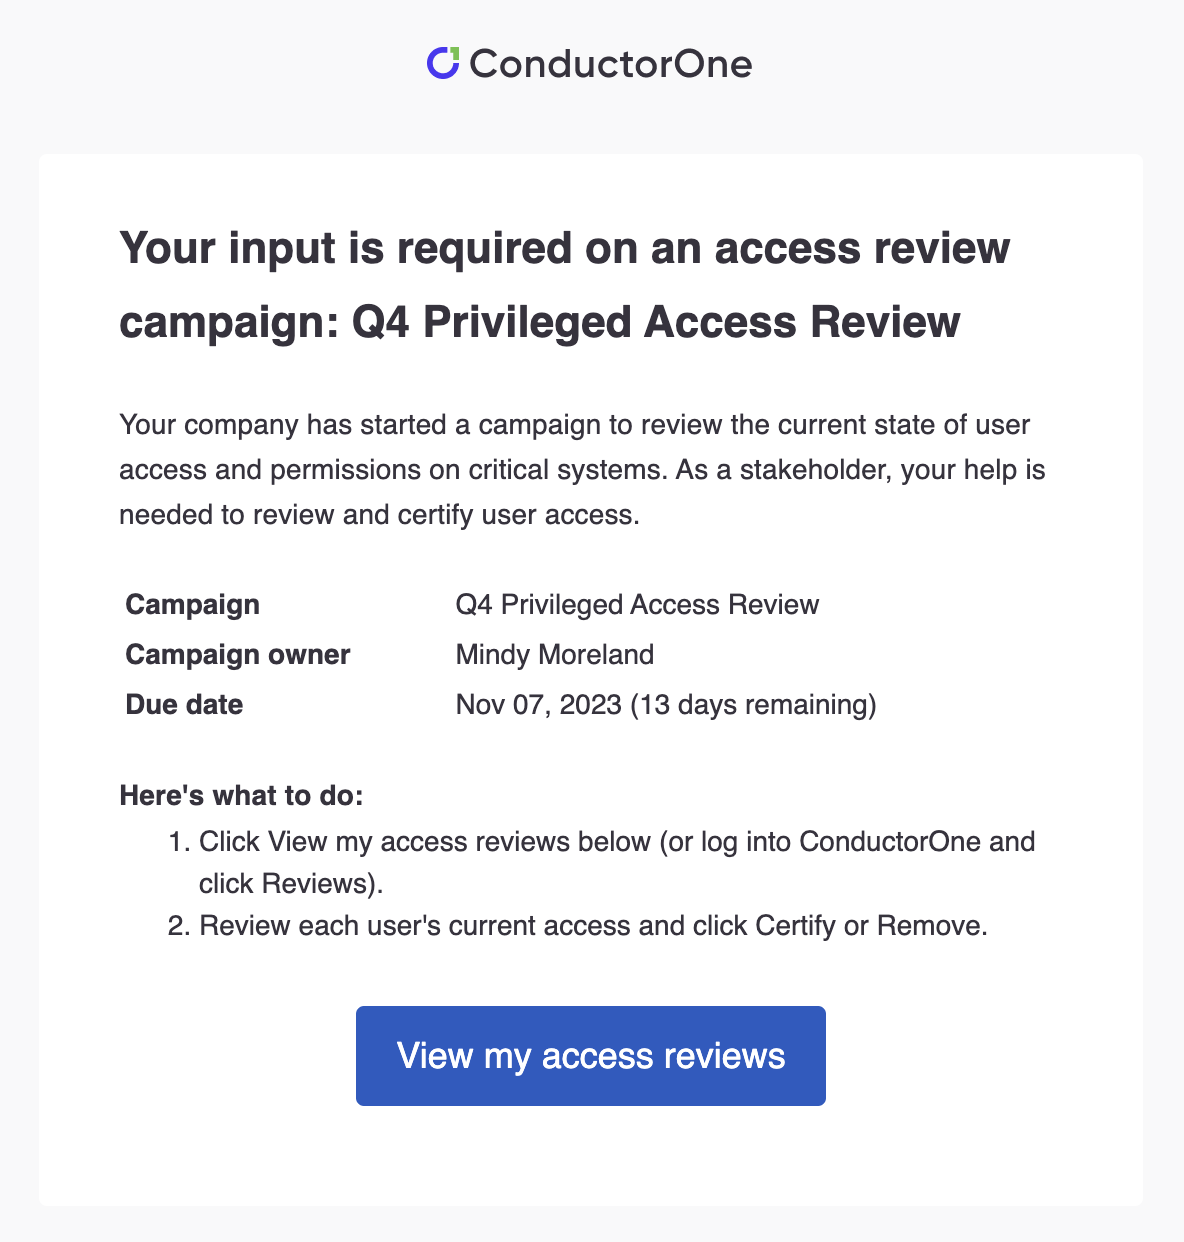 The campaign kickoff email sent by ConductorOne, showing the campaign name, owner, due date, basic instructions, and that the recipient's input is needed.